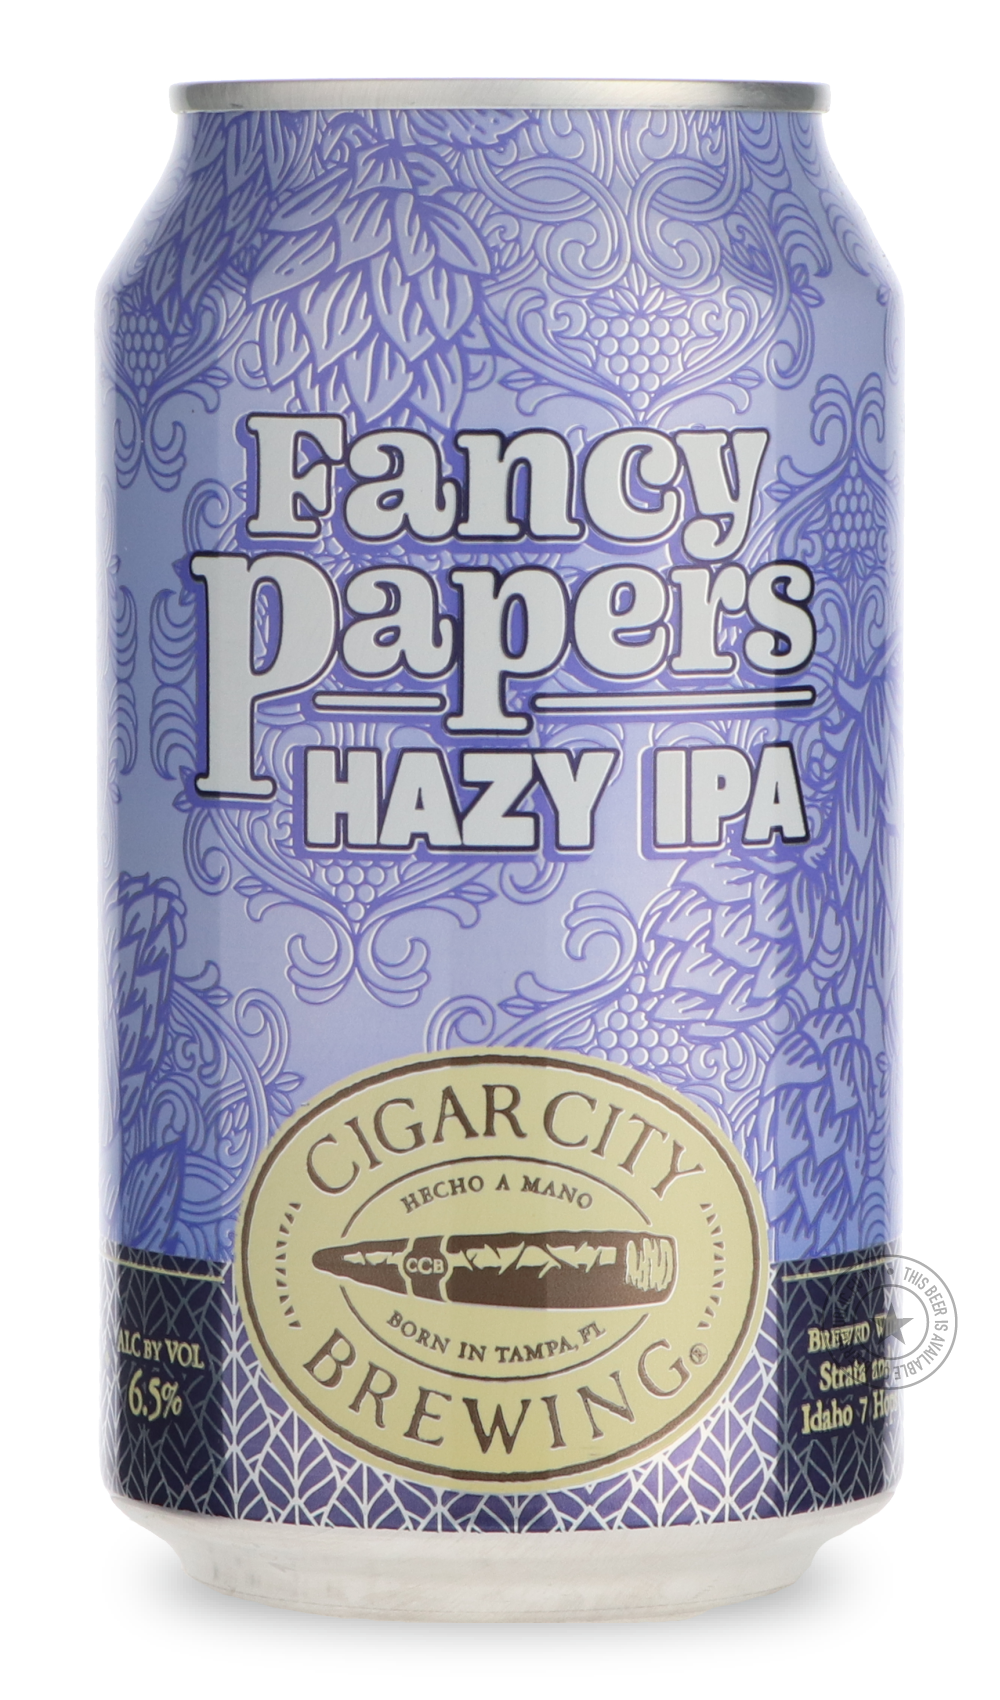 -Cigar City- Fancy Papers-IPA- Only @ Beer Republic - The best online beer store for American & Canadian craft beer - Buy beer online from the USA and Canada - Bier online kopen - Amerikaans bier kopen - Craft beer store - Craft beer kopen - Amerikanisch bier kaufen - Bier online kaufen - Acheter biere online - IPA - Stout - Porter - New England IPA - Hazy IPA - Imperial Stout - Barrel Aged - Barrel Aged Imperial Stout - Brown - Dark beer - Blond - Blonde - Pilsner - Lager - Wheat - Weizen - Amber - Barley 